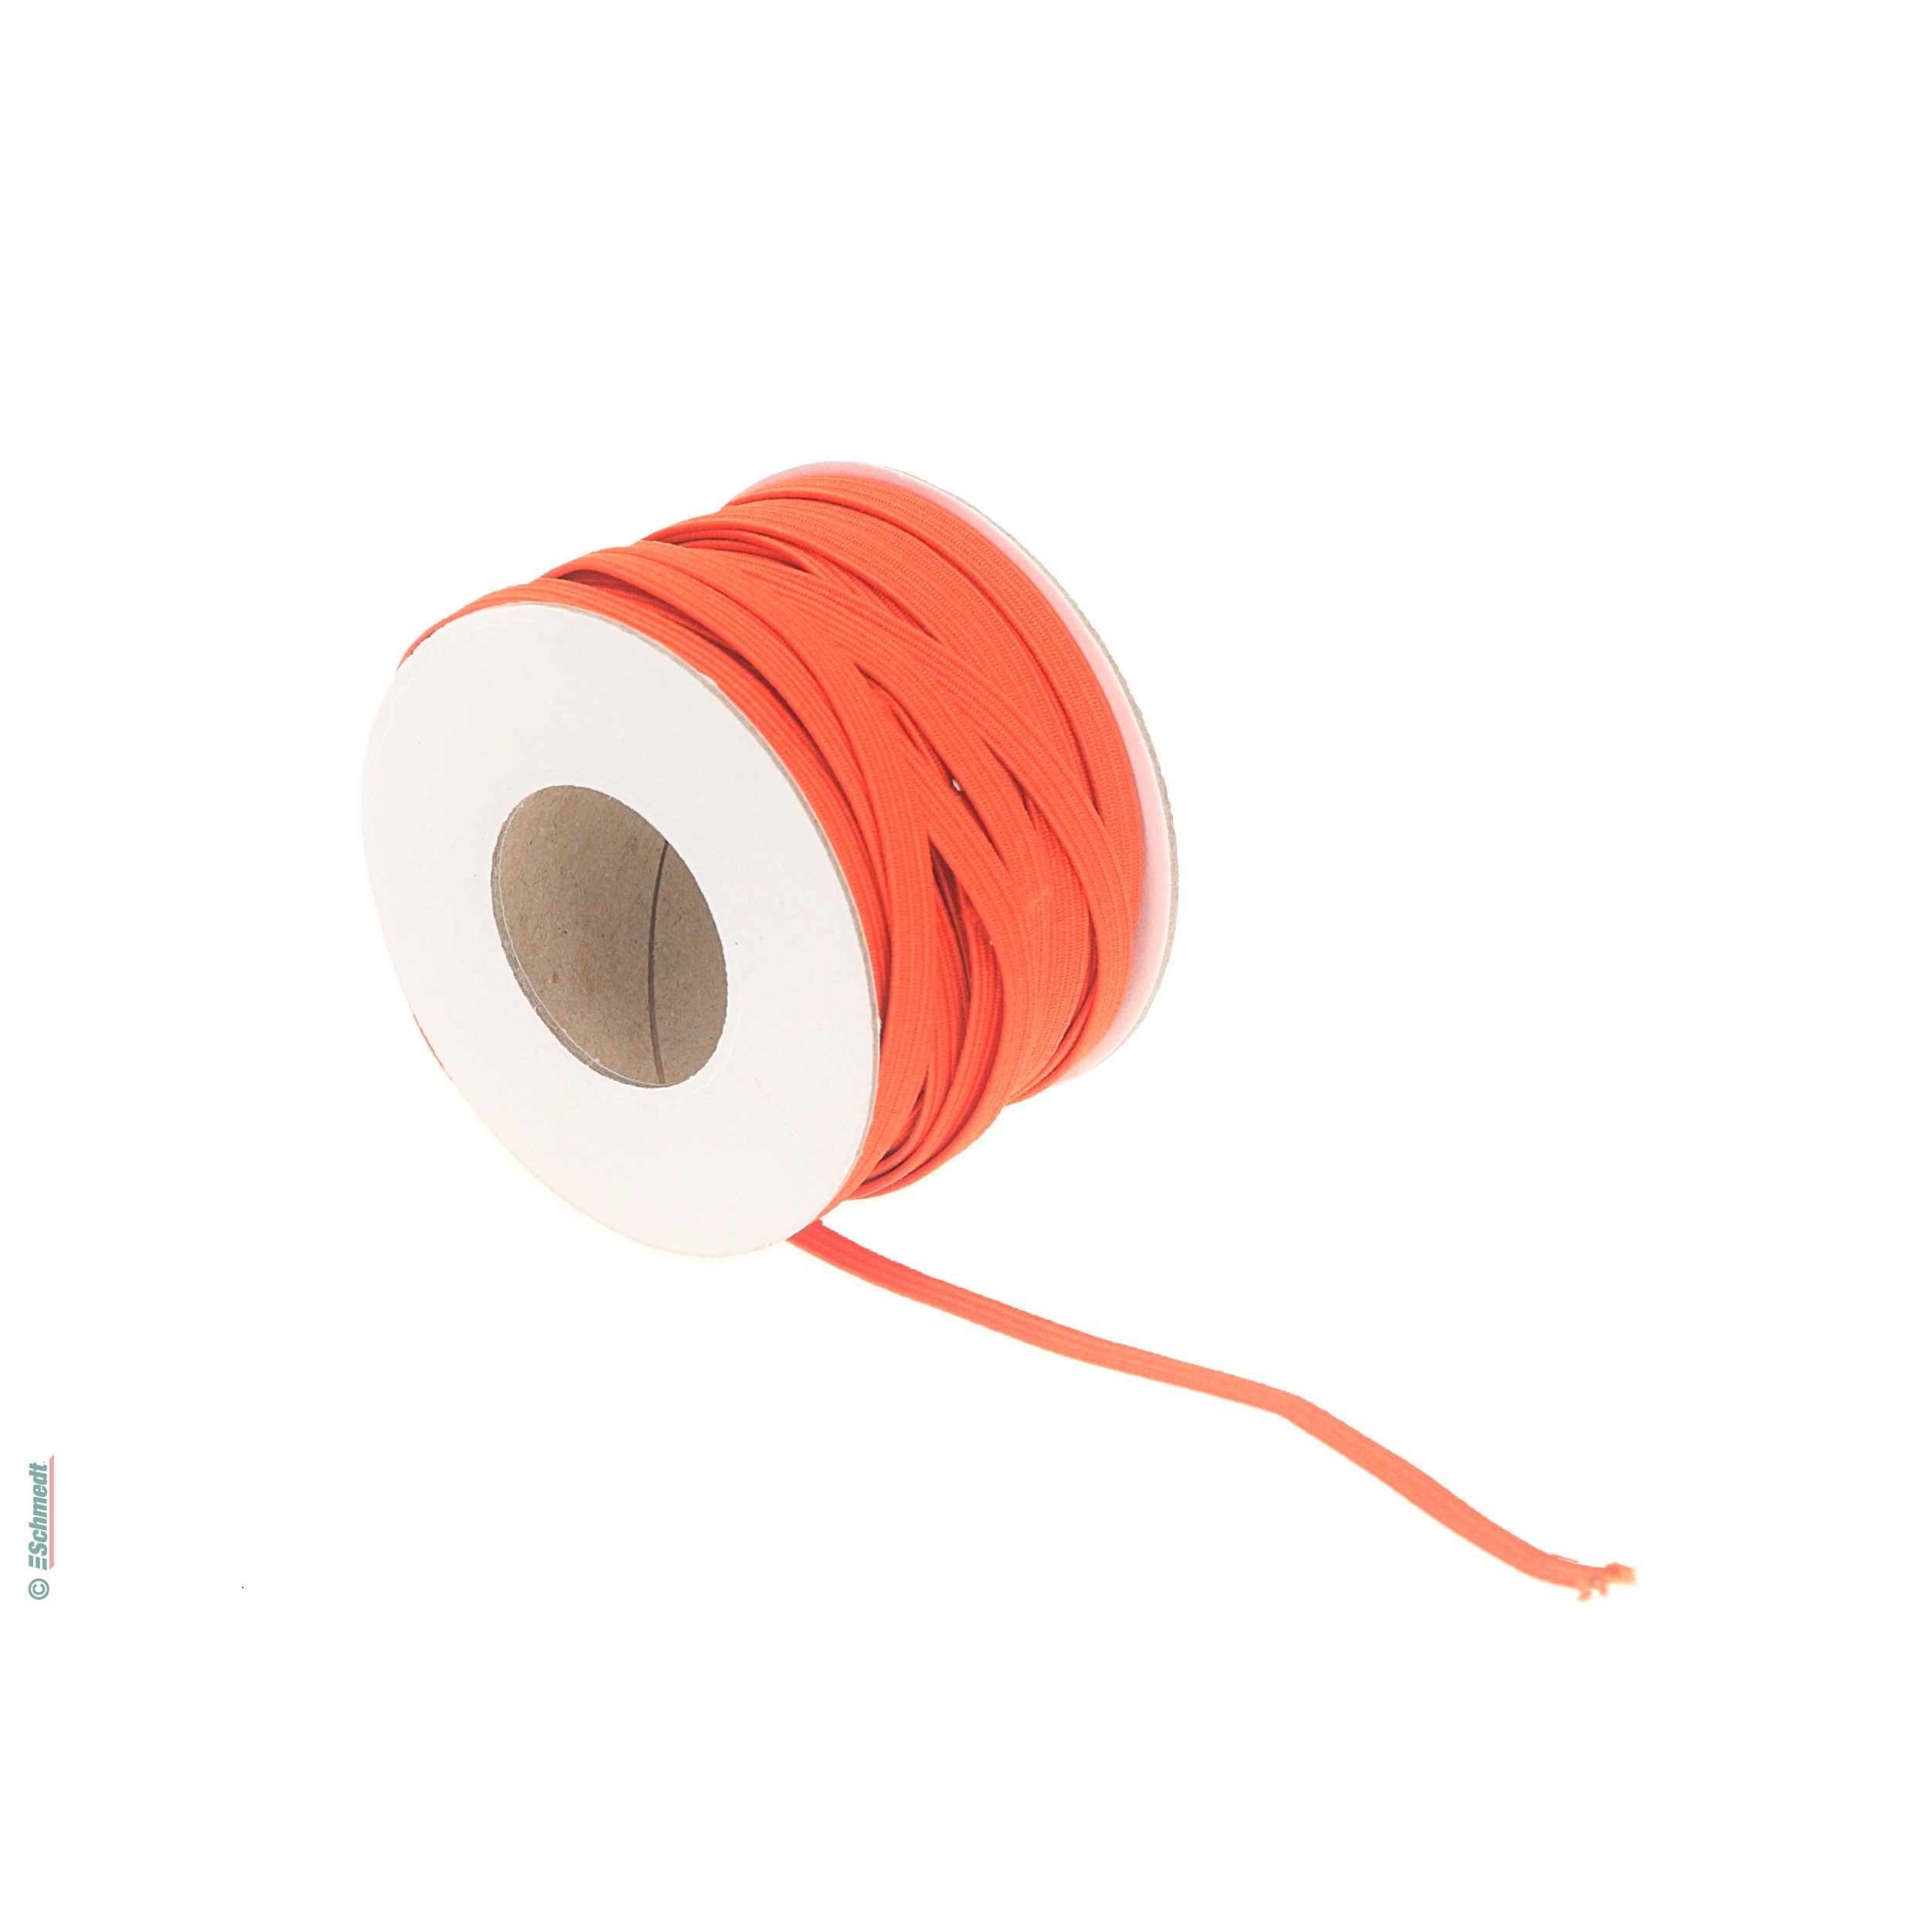 Flat rubber lace - Colour 012 - light orange - Width (in mm) approx. 5.5 - Roll Length (in m) 100 - for binding and closing books, diaries, ... - image-1